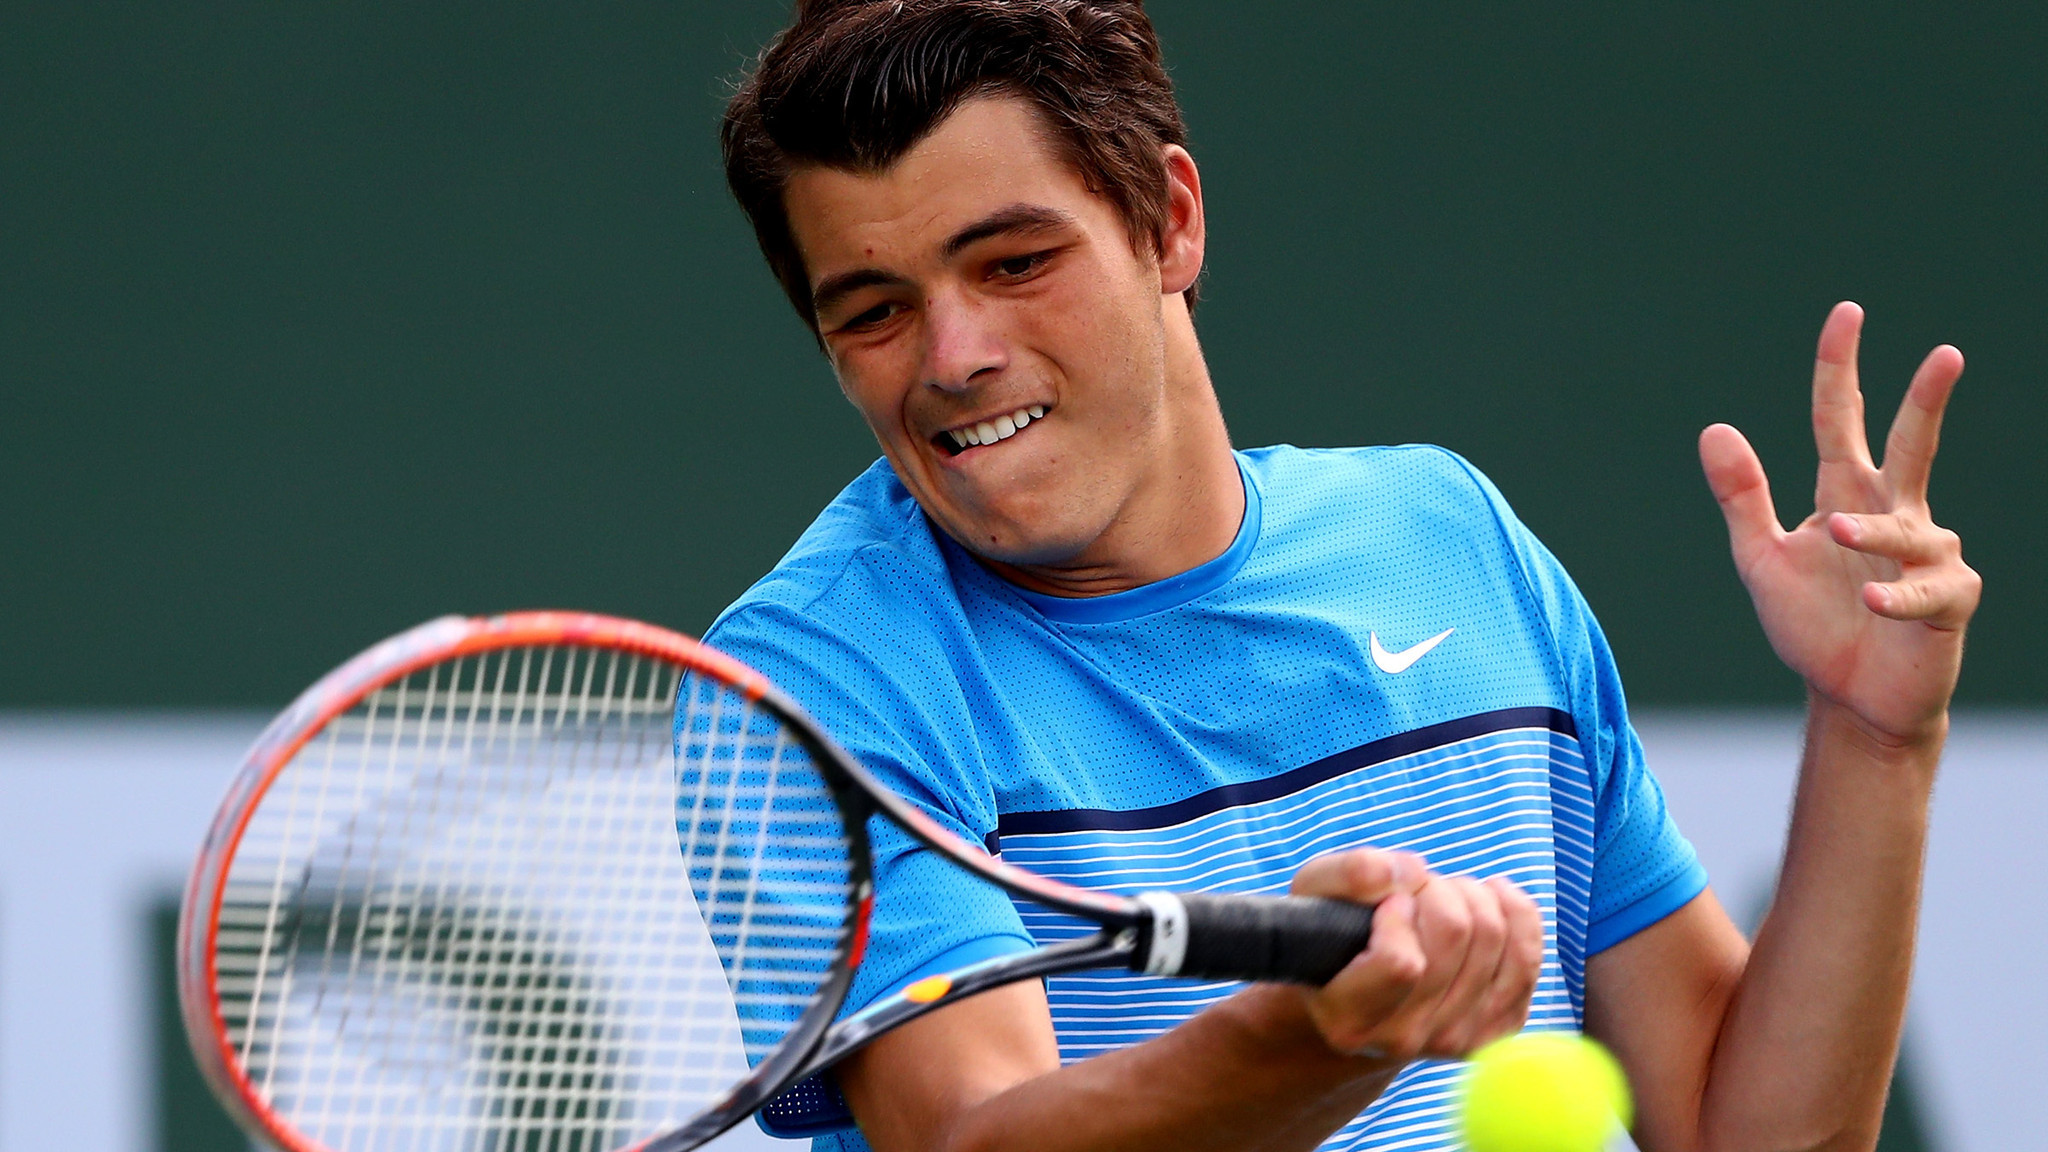 Taylor Fritz is upset about losing to friend Frances Tiafoe at BNP